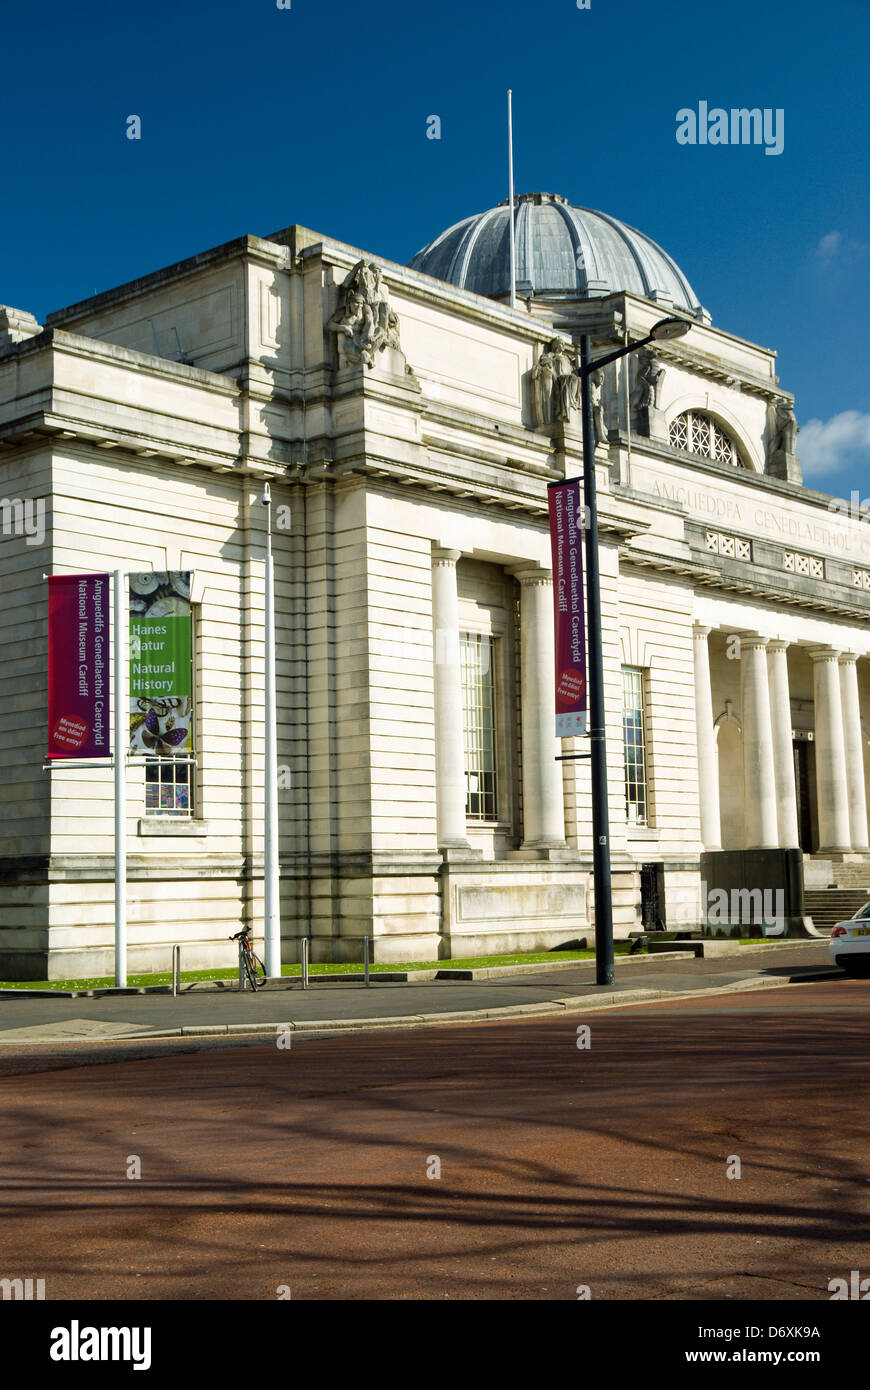 National Museum of Wales, Cathays Park, Cardiff, Pays de Galles, Royaume-Uni. Banque D'Images